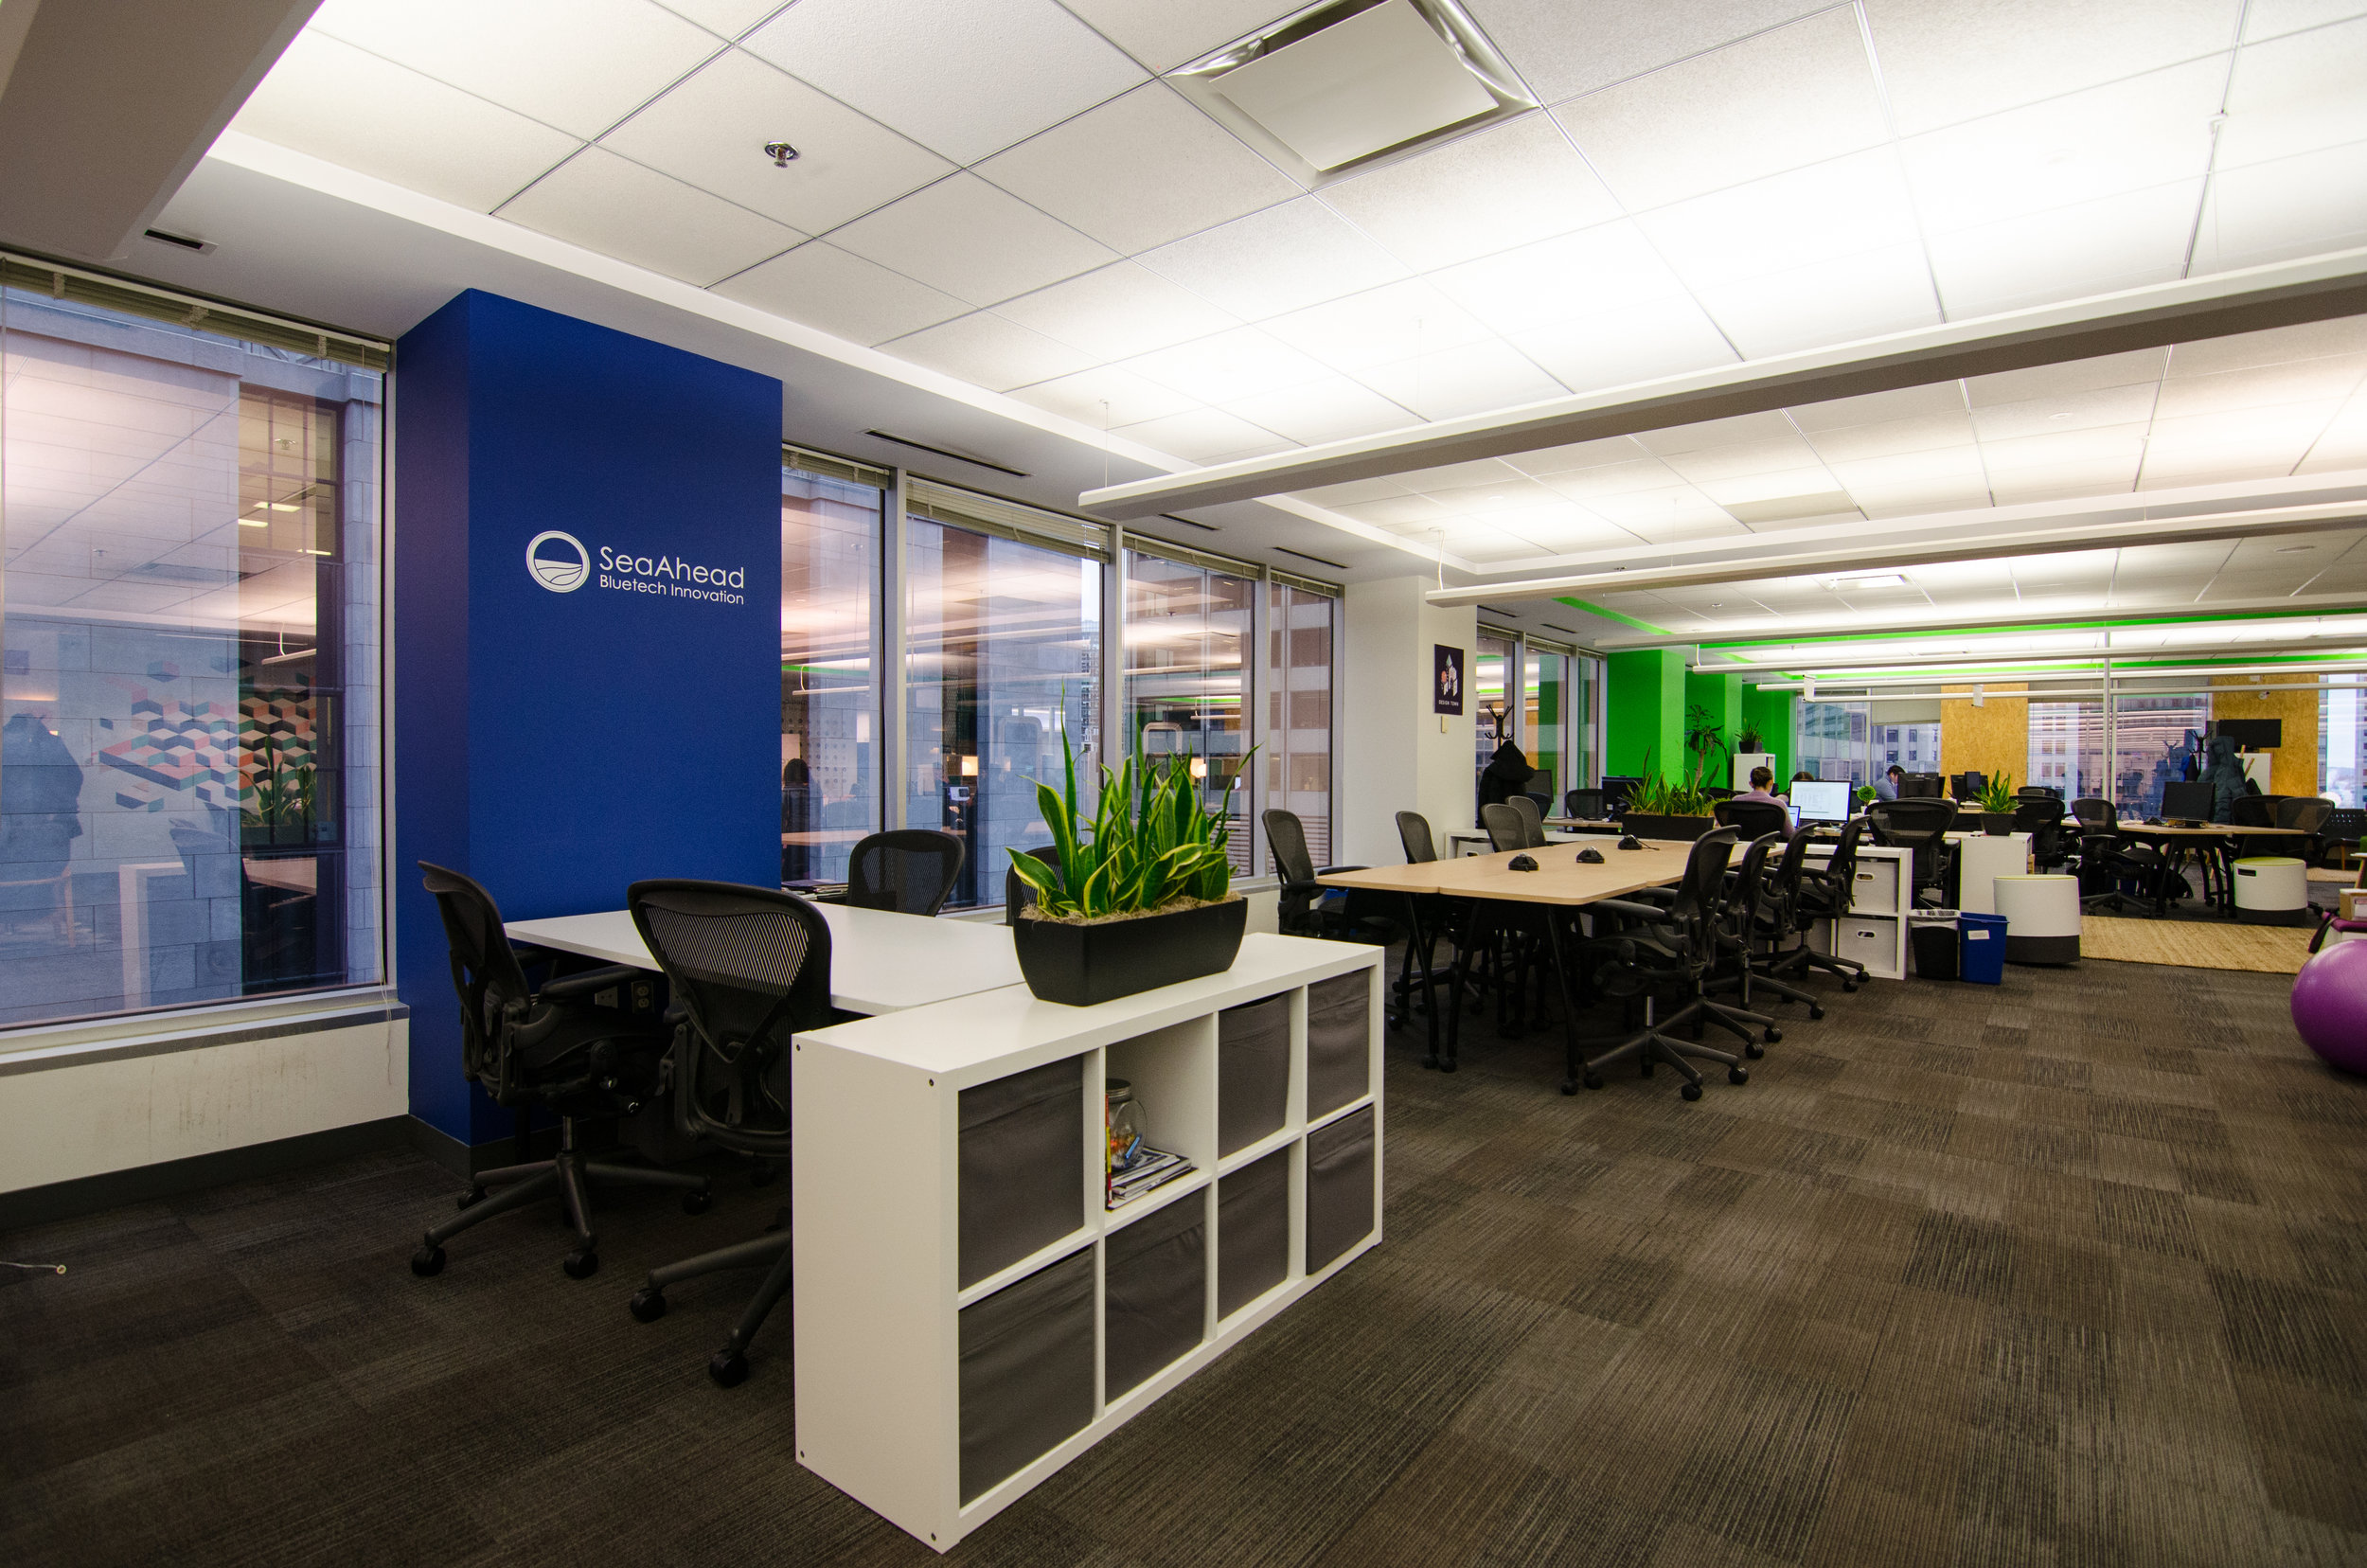 The SeaAhead coworking space at CIC Boston provides ocean innovators with shared workspace and an ecosystem of mentors, service providers, and investors. Photo courtesy of SeaAhead.